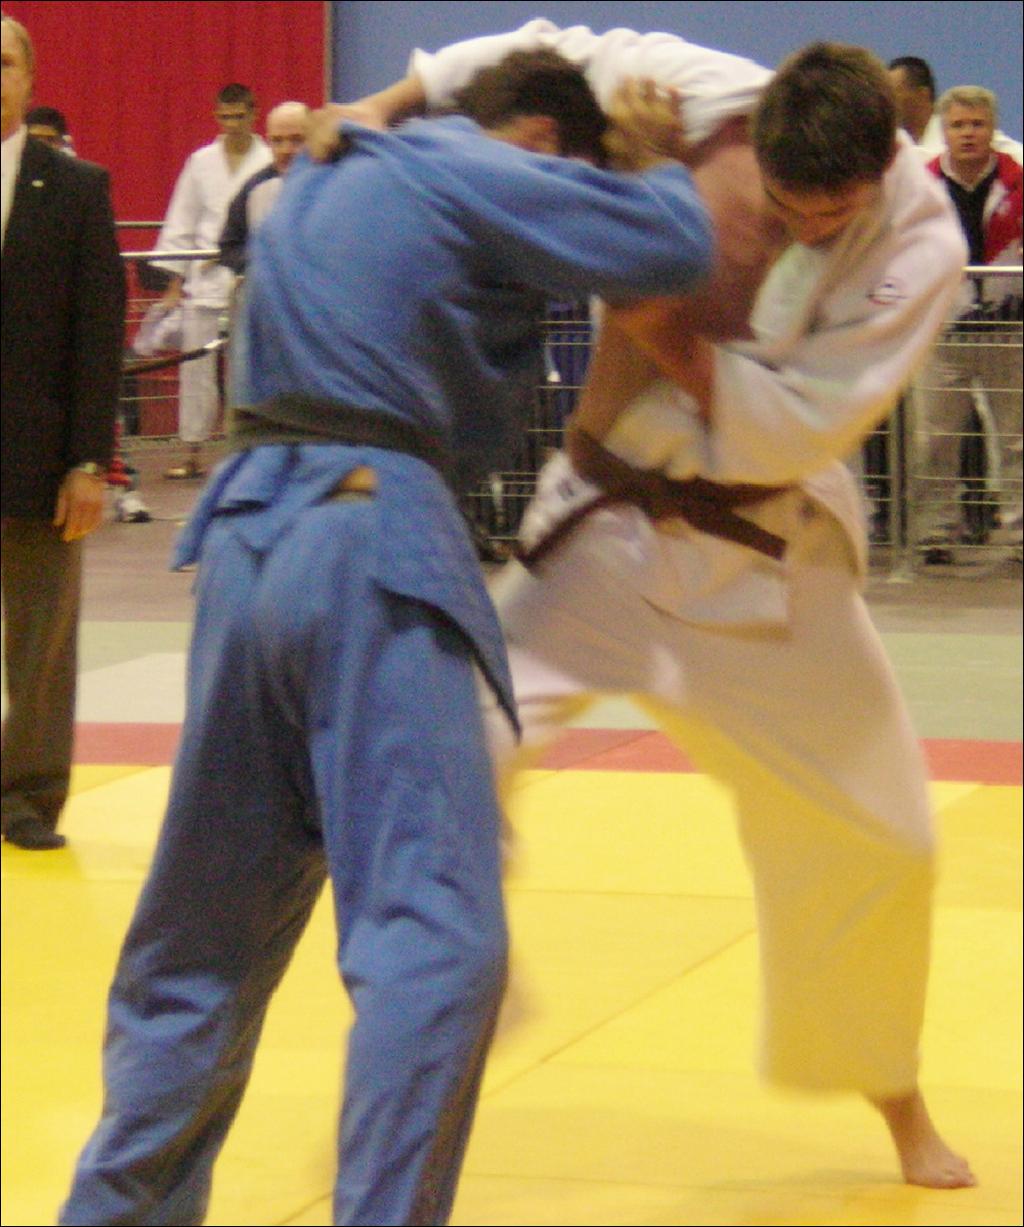 life-long participation in the sport of judo.